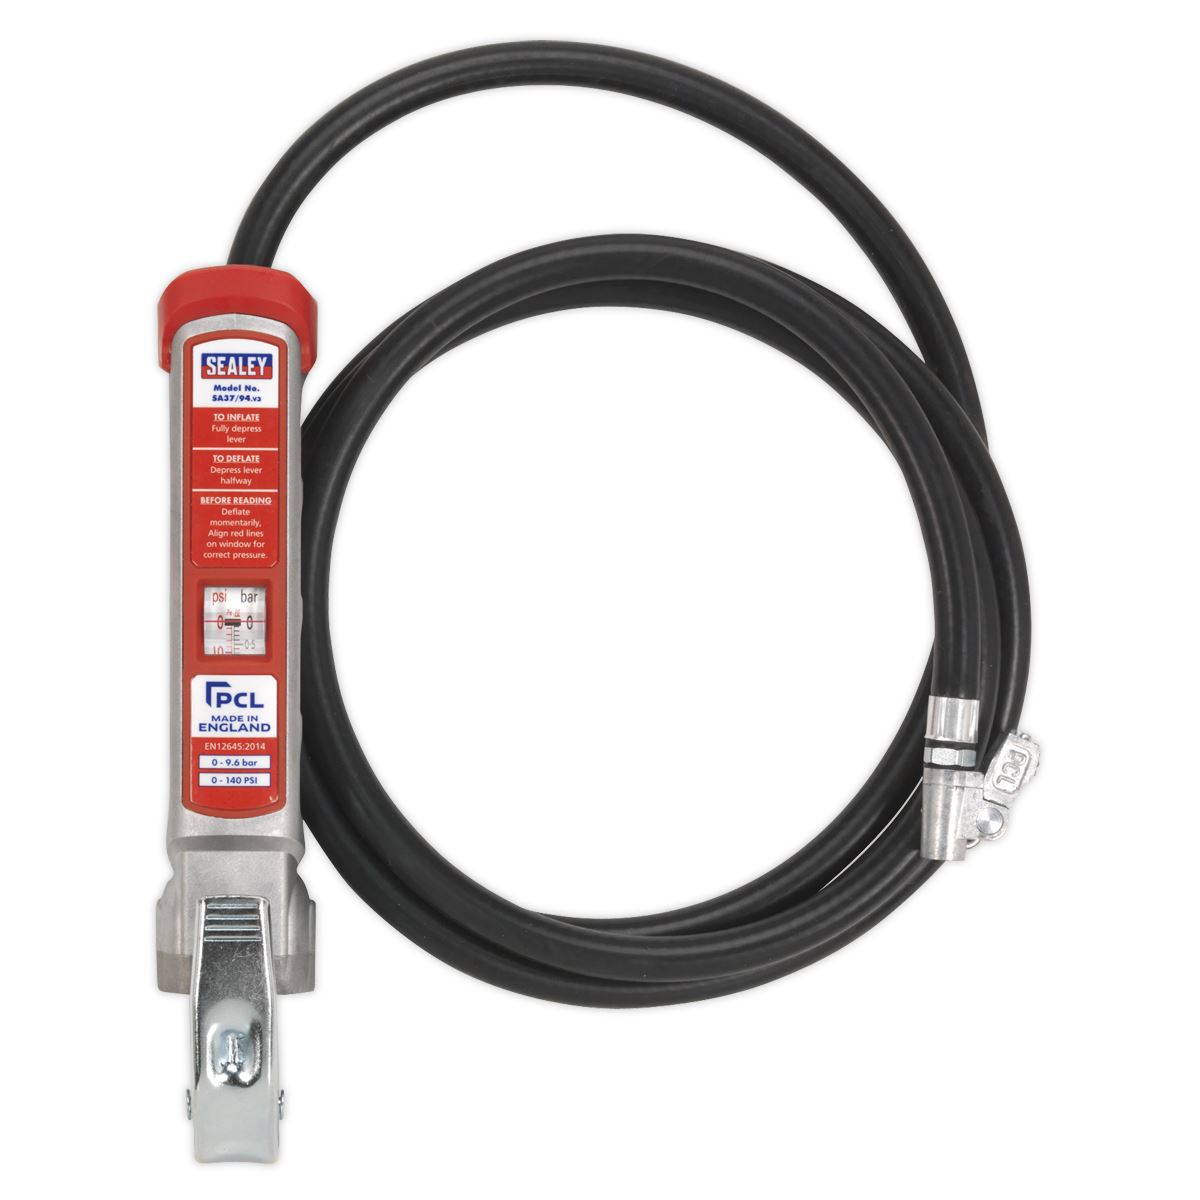 Sealey Premier - PCL Professional Tyre Inflator with 2.5m Hose & Clip-On Connector